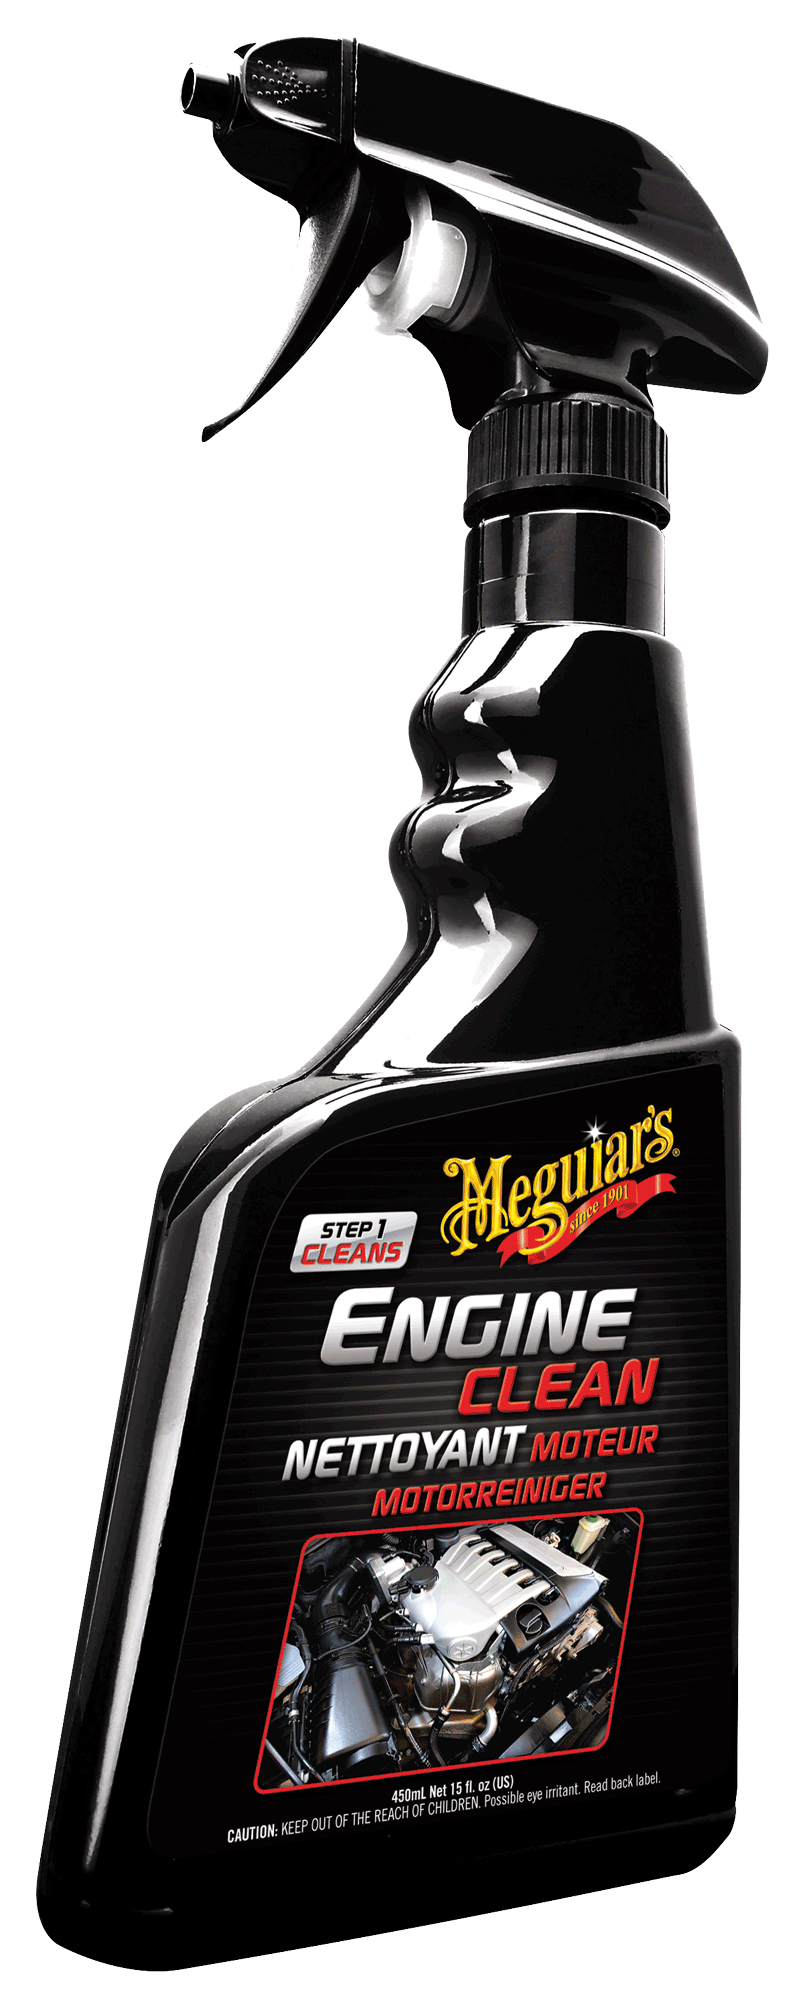 Meguiar´s Engine Clean Motorreiniger, other Surfaces, outside, Car Care